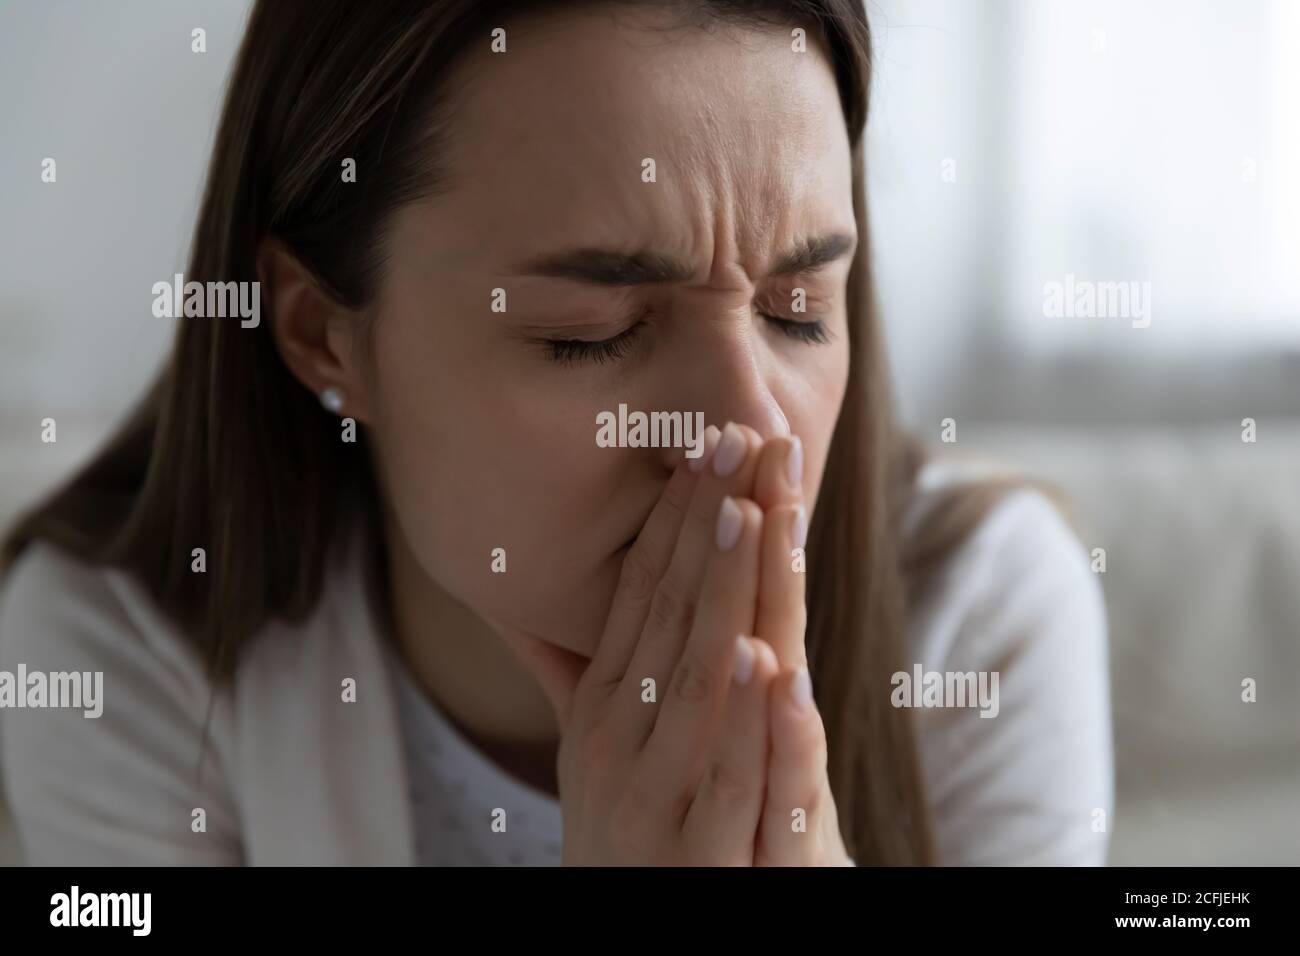 Depressed unhappy young woman suffering from personal psychological problems. Stock Photo